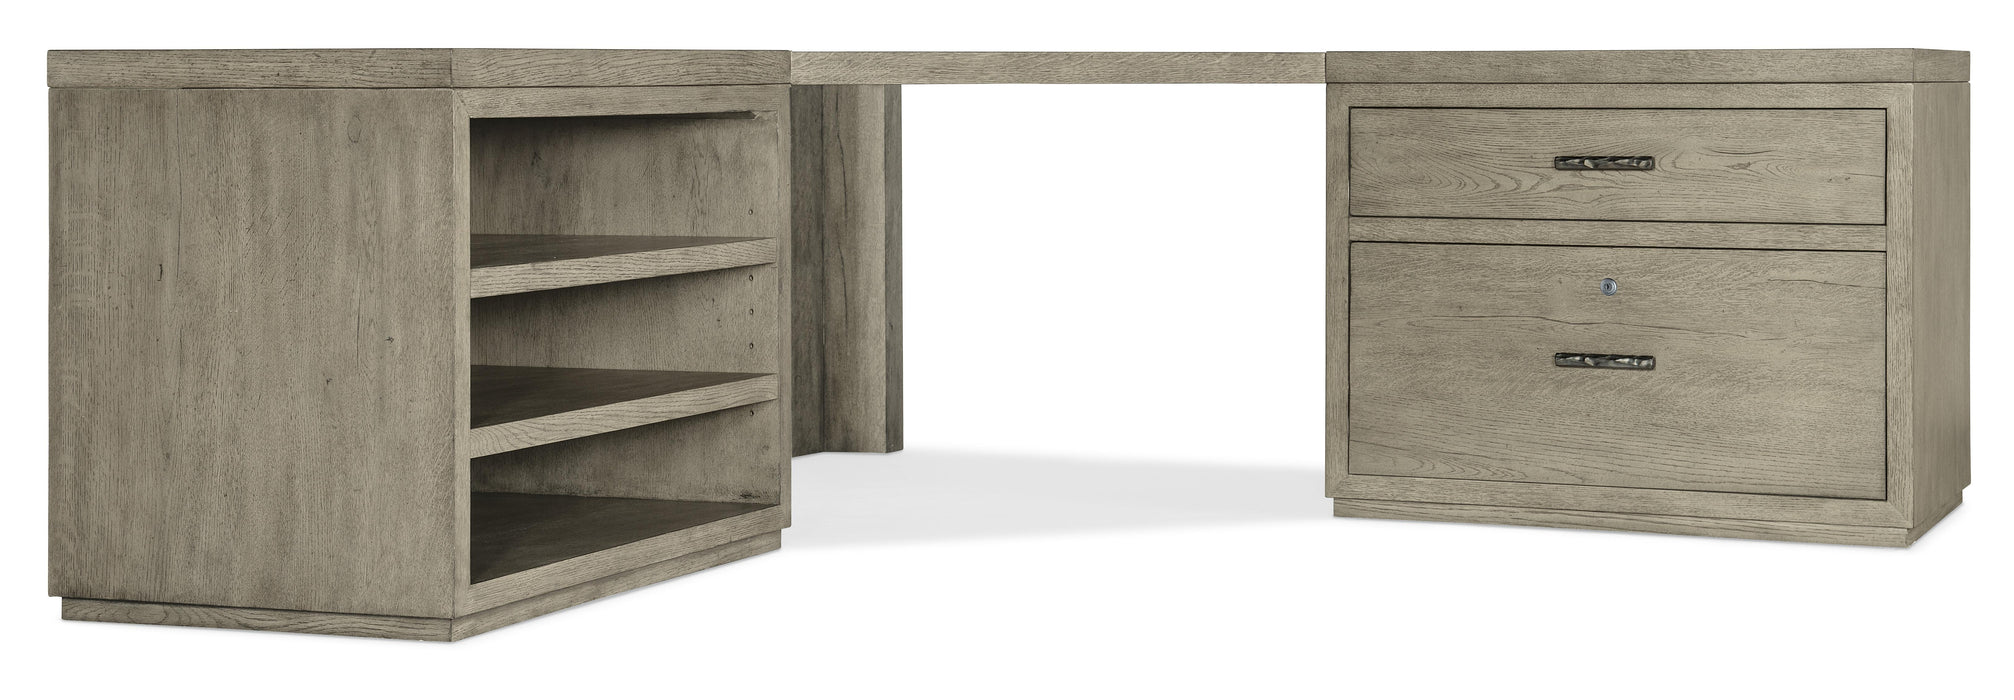 Linville Falls Corner Desk with Lateral File and Open Desk Cabinet image